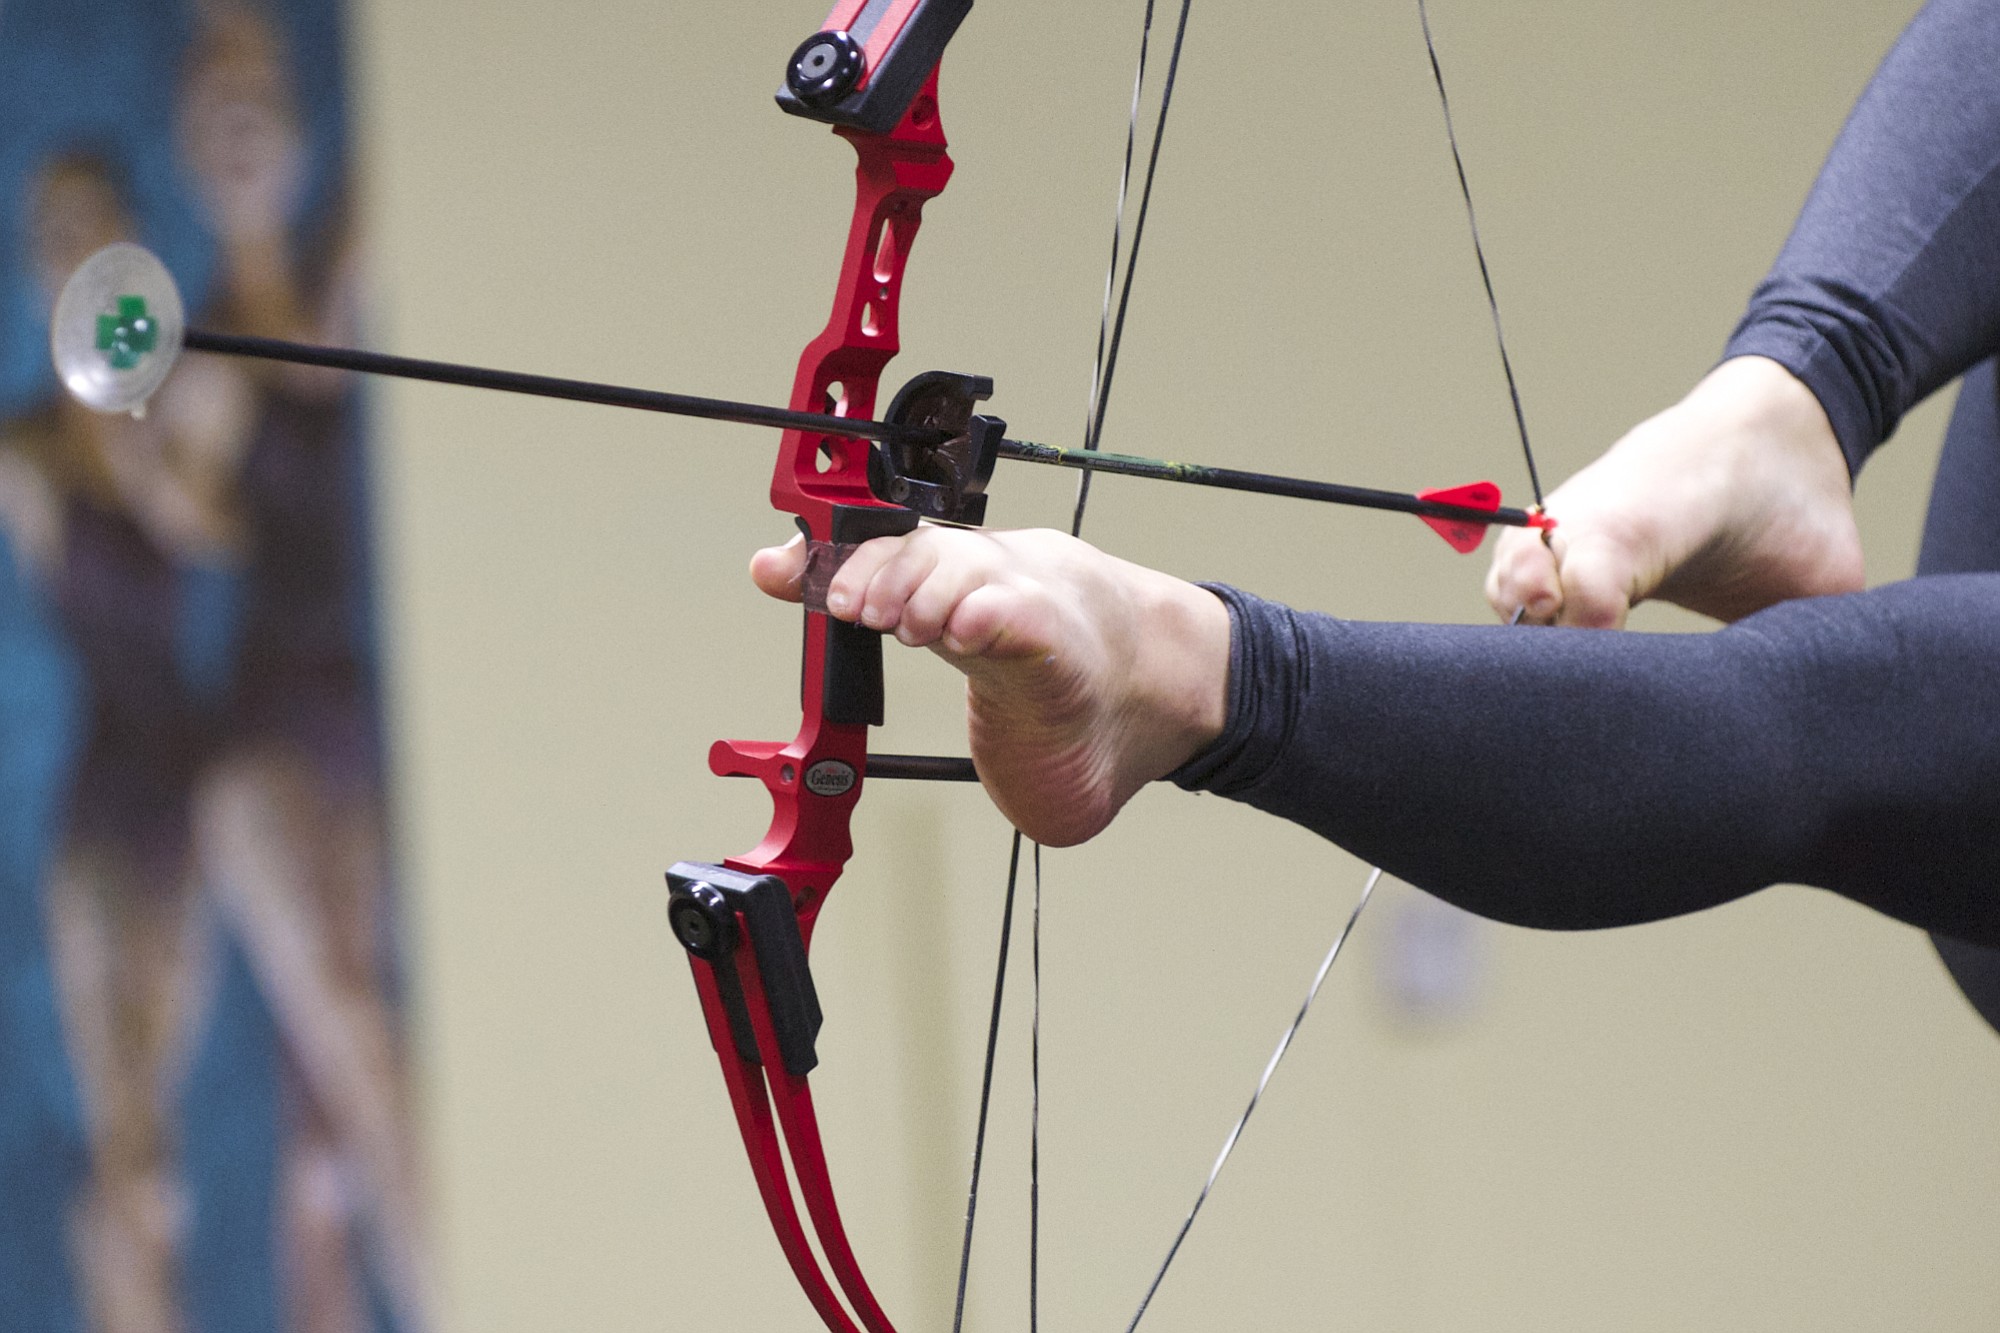 Brittany Walsh said her acrobatic archery trick was inspired by an old photograph of a Mongolian circus performer.